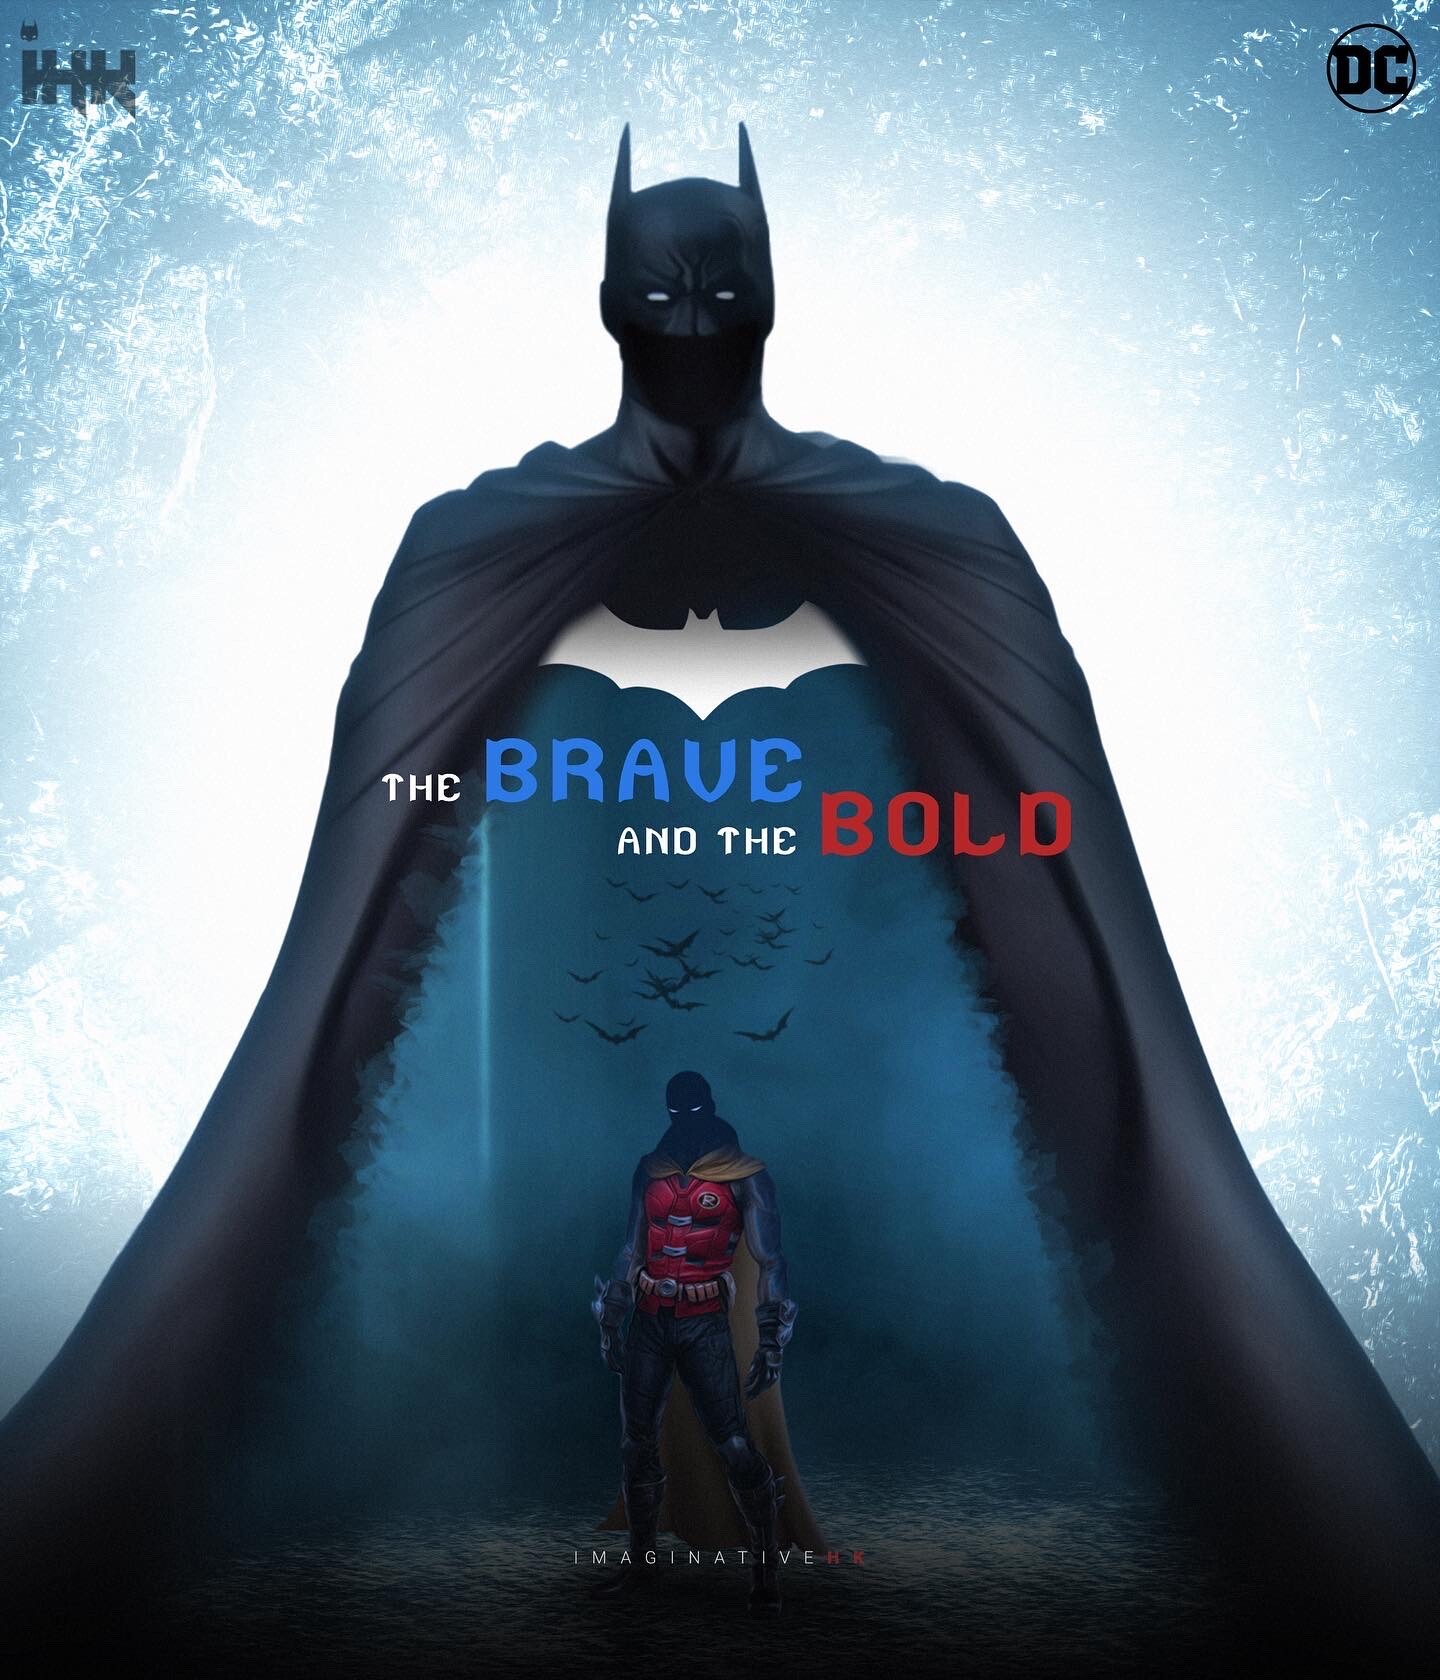 ArtStation - The Brave and the Bold - Batman and Robin